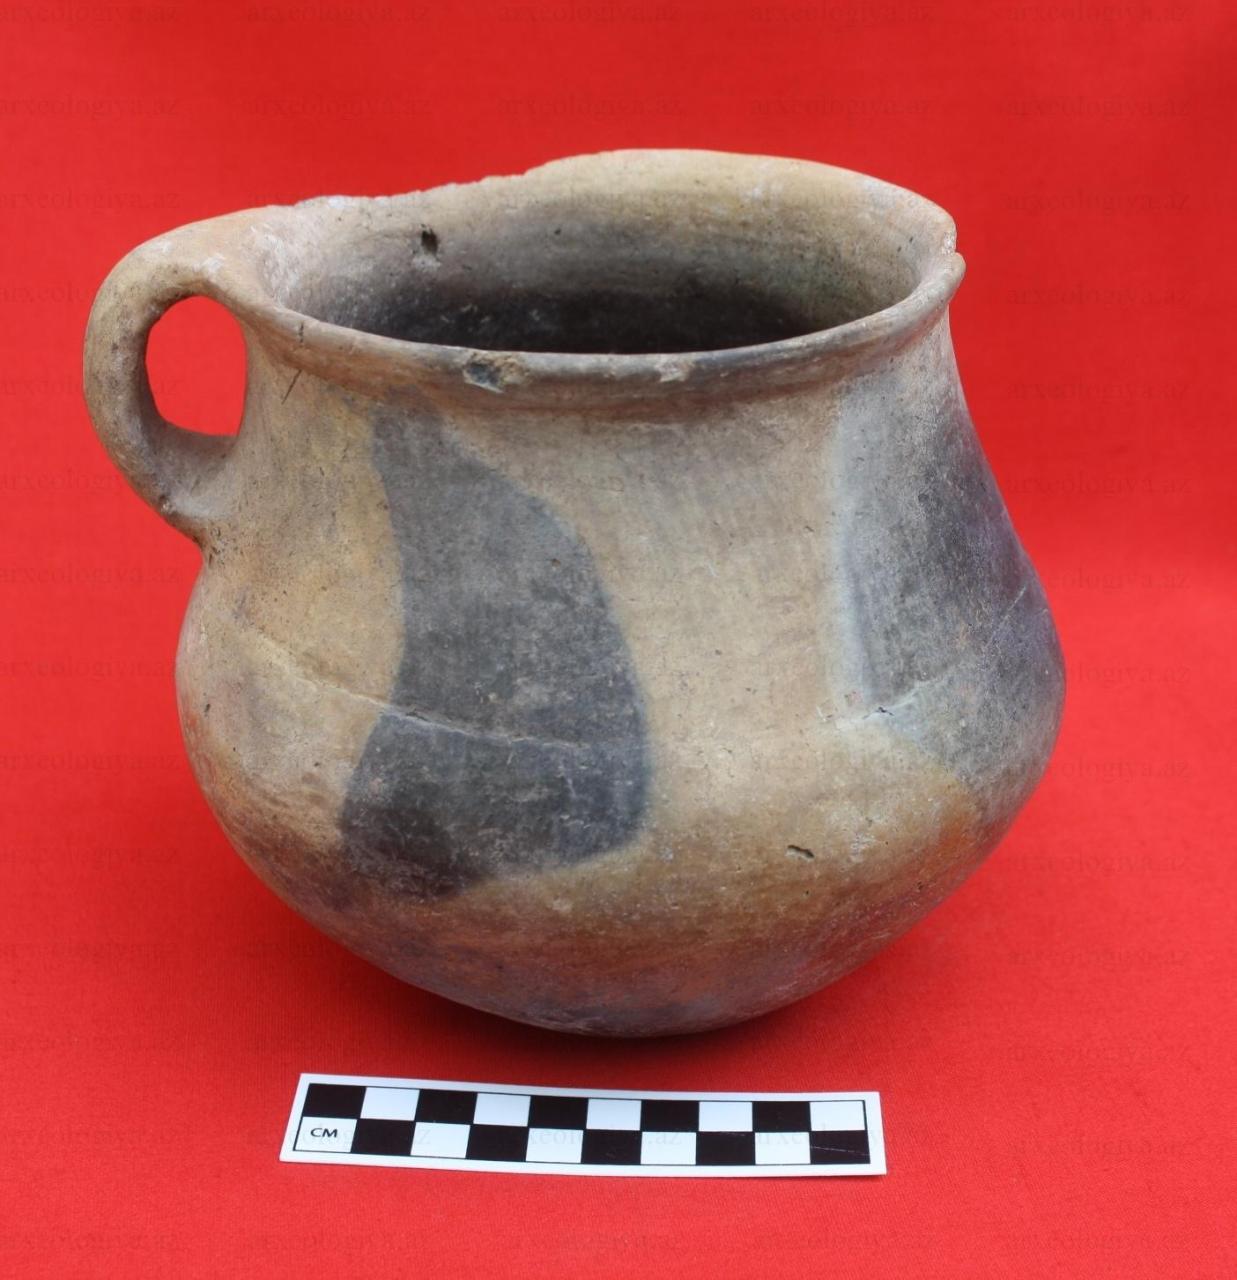 Ancient archaeological artifacts discovered in Shabran - Gallery Image